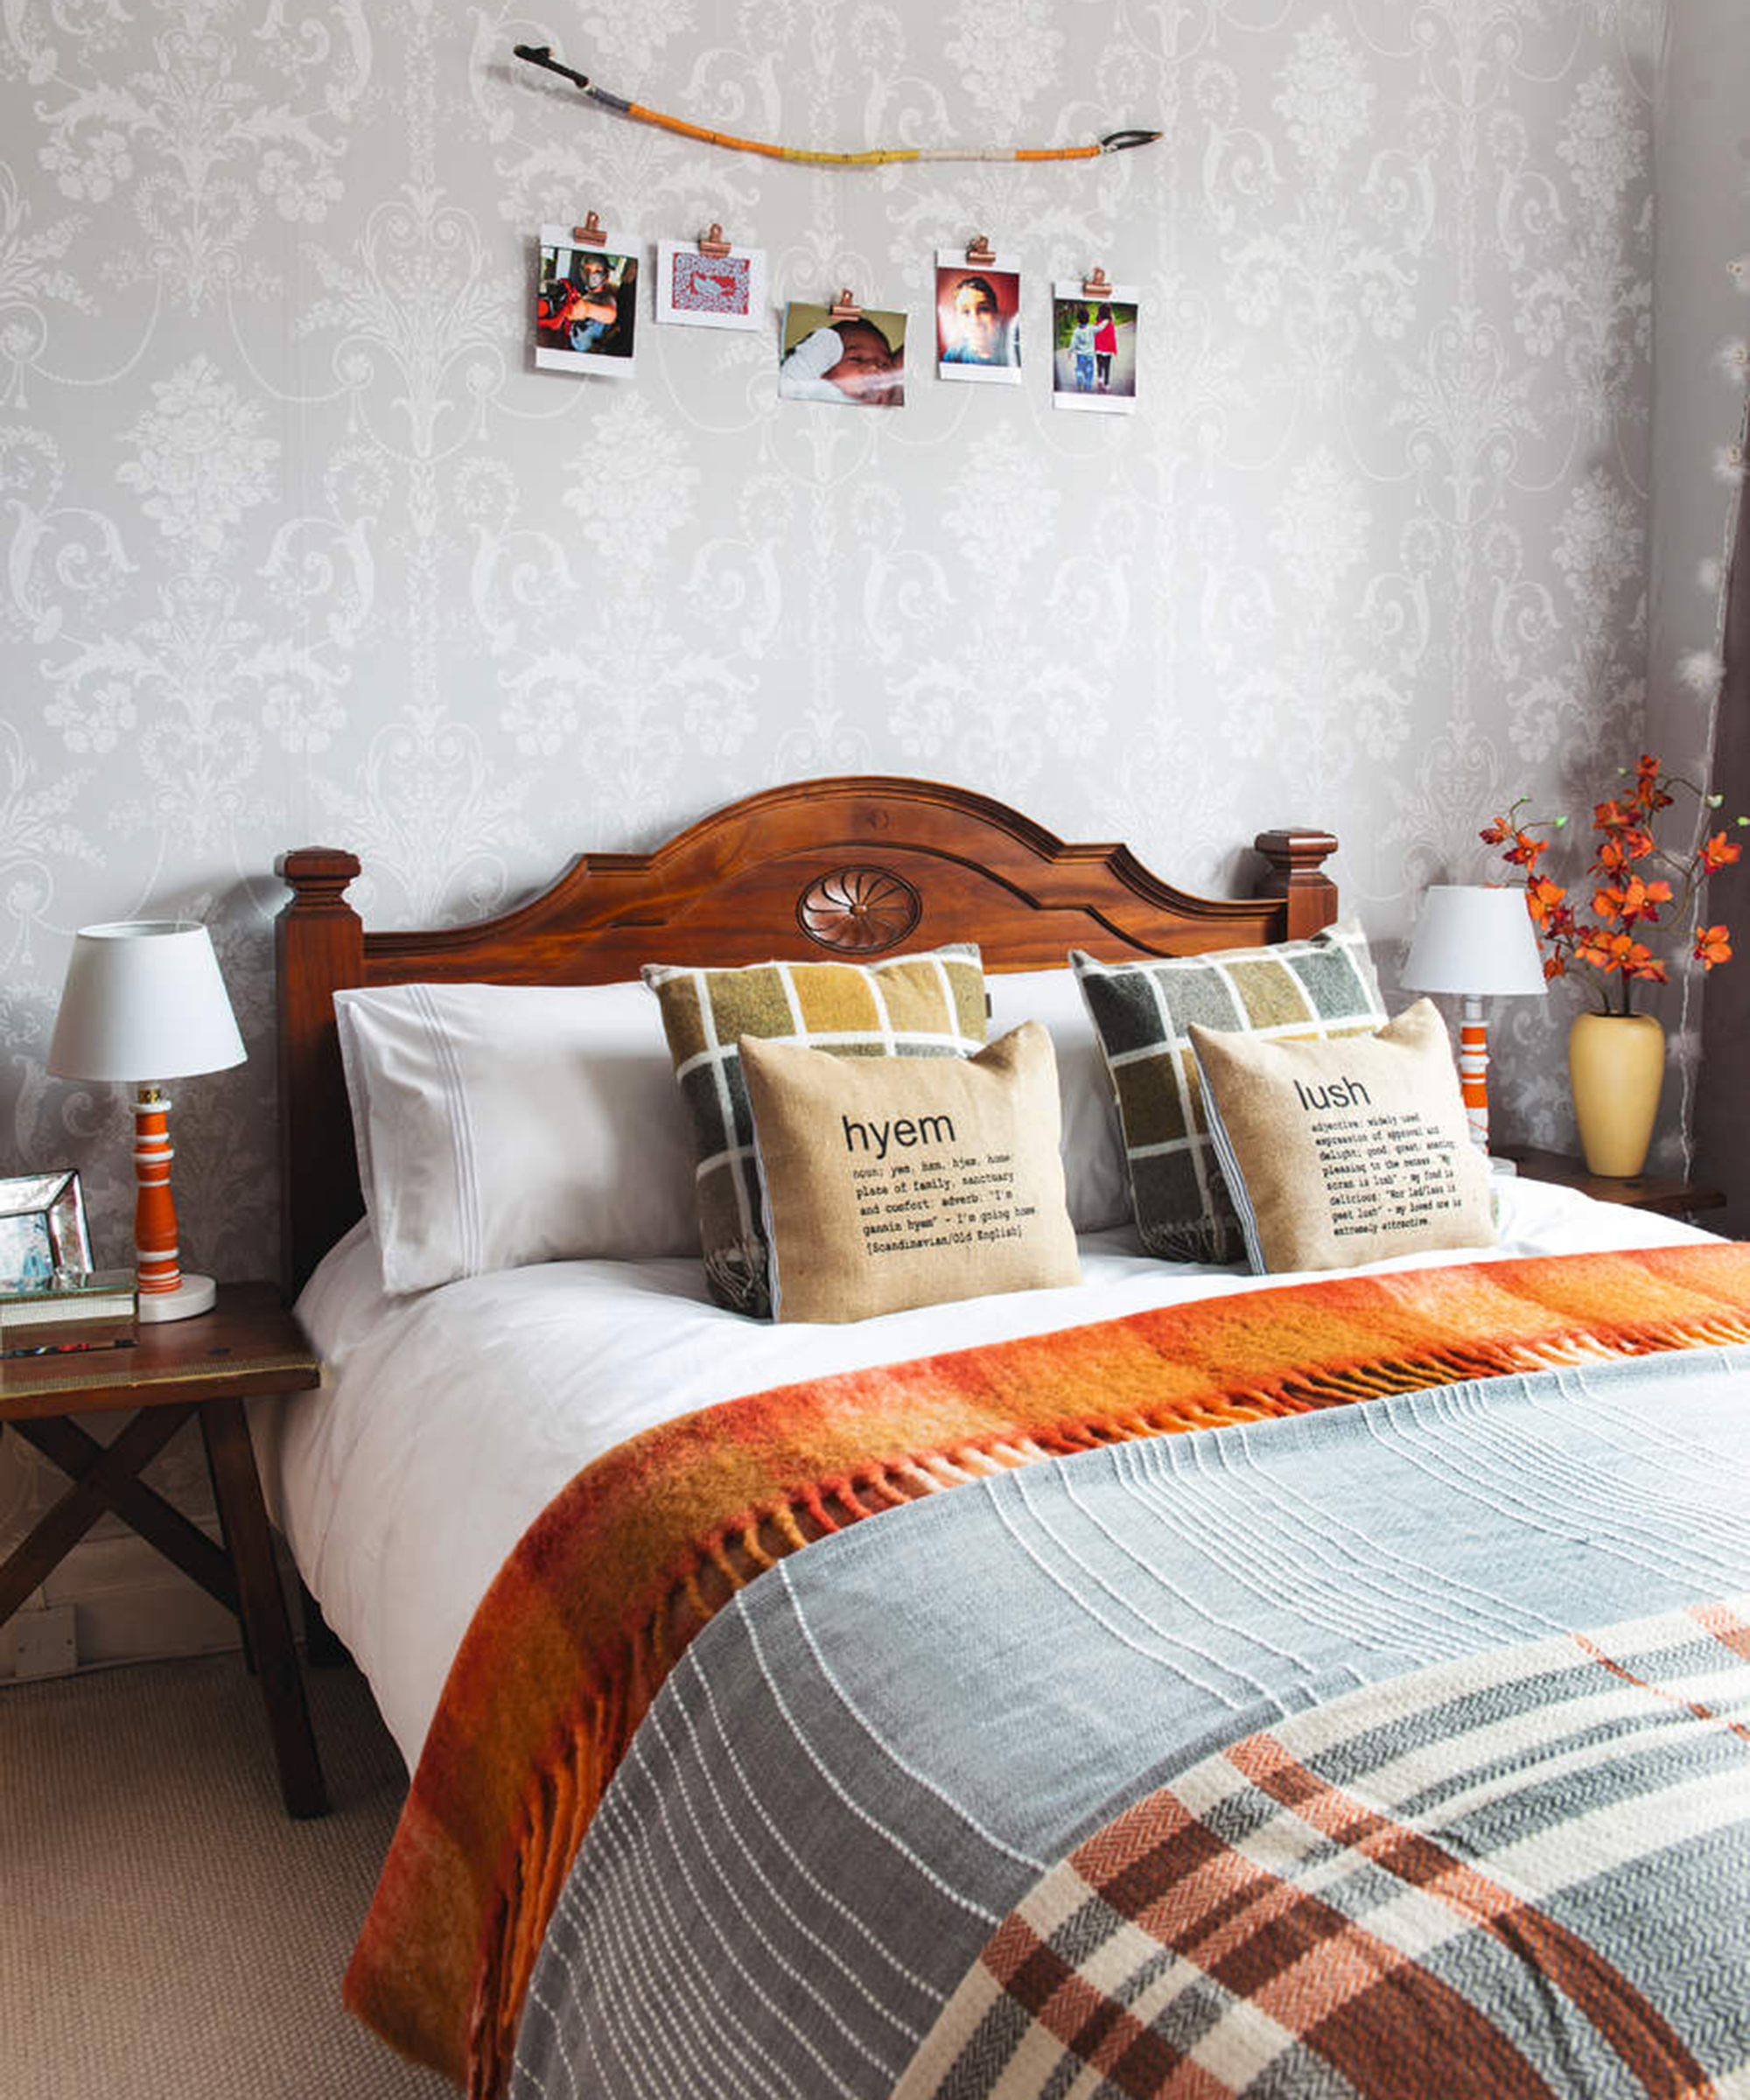 A master bedroom with rustic shades of orange and warm wood